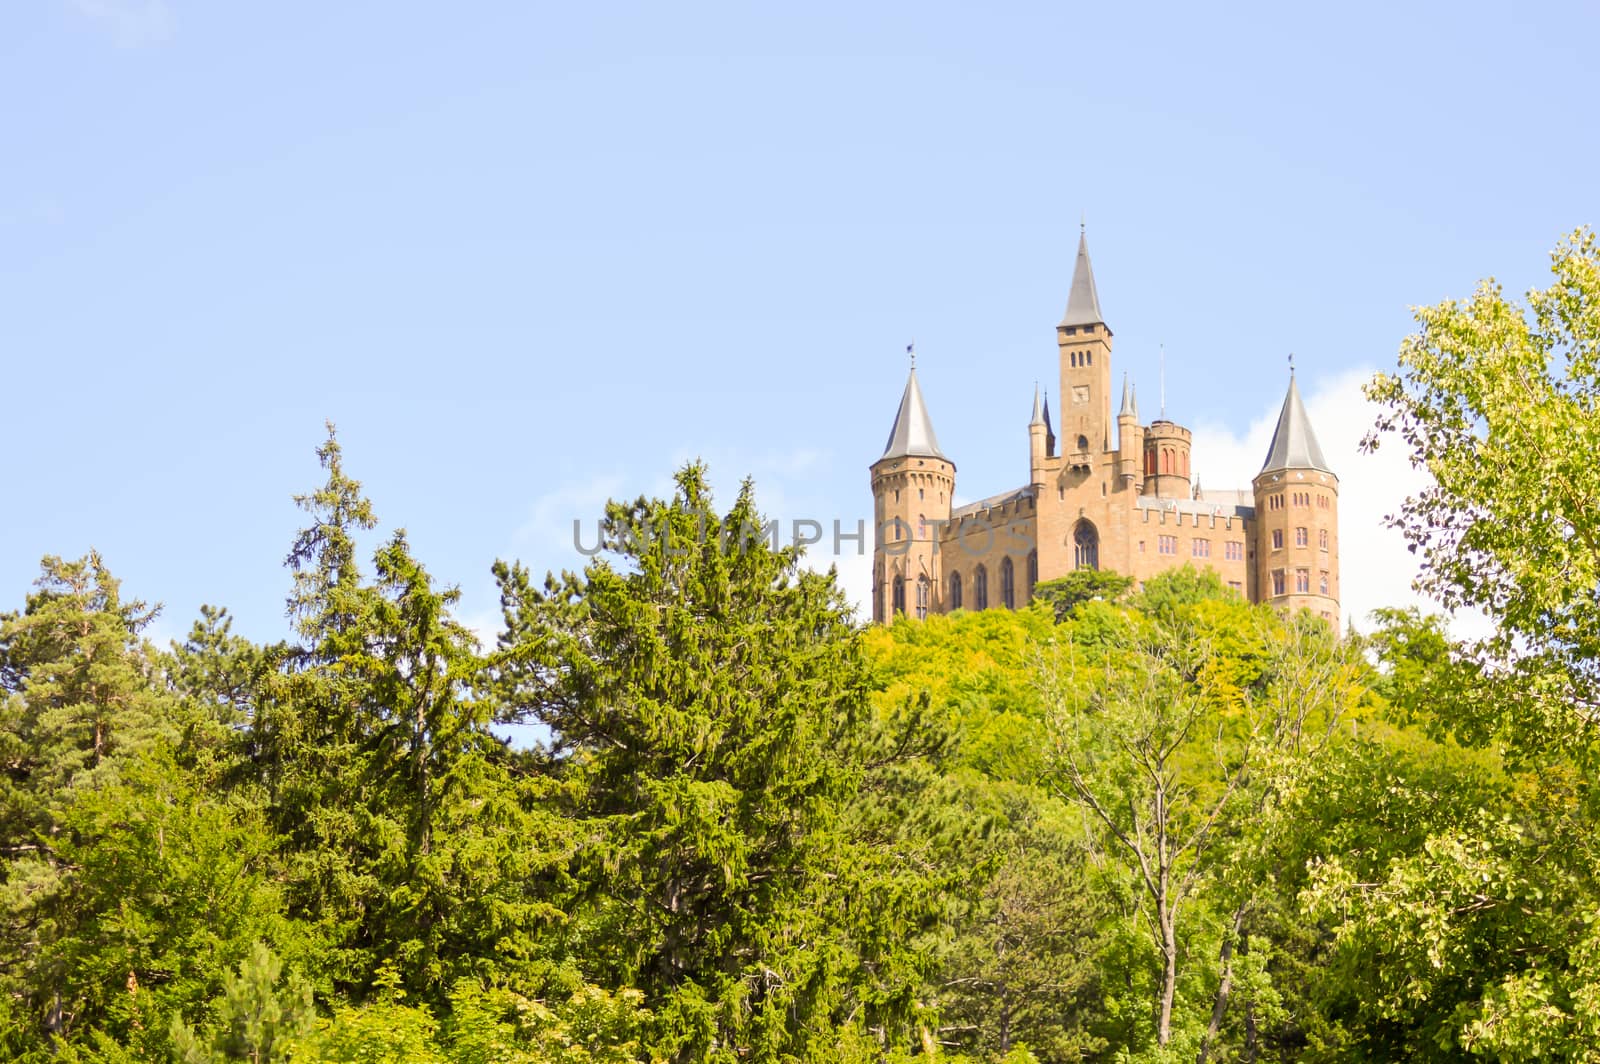 View of the castle of Hohenzollern in the municipality of bisingen in the state of Baden-Württemberg in Germany